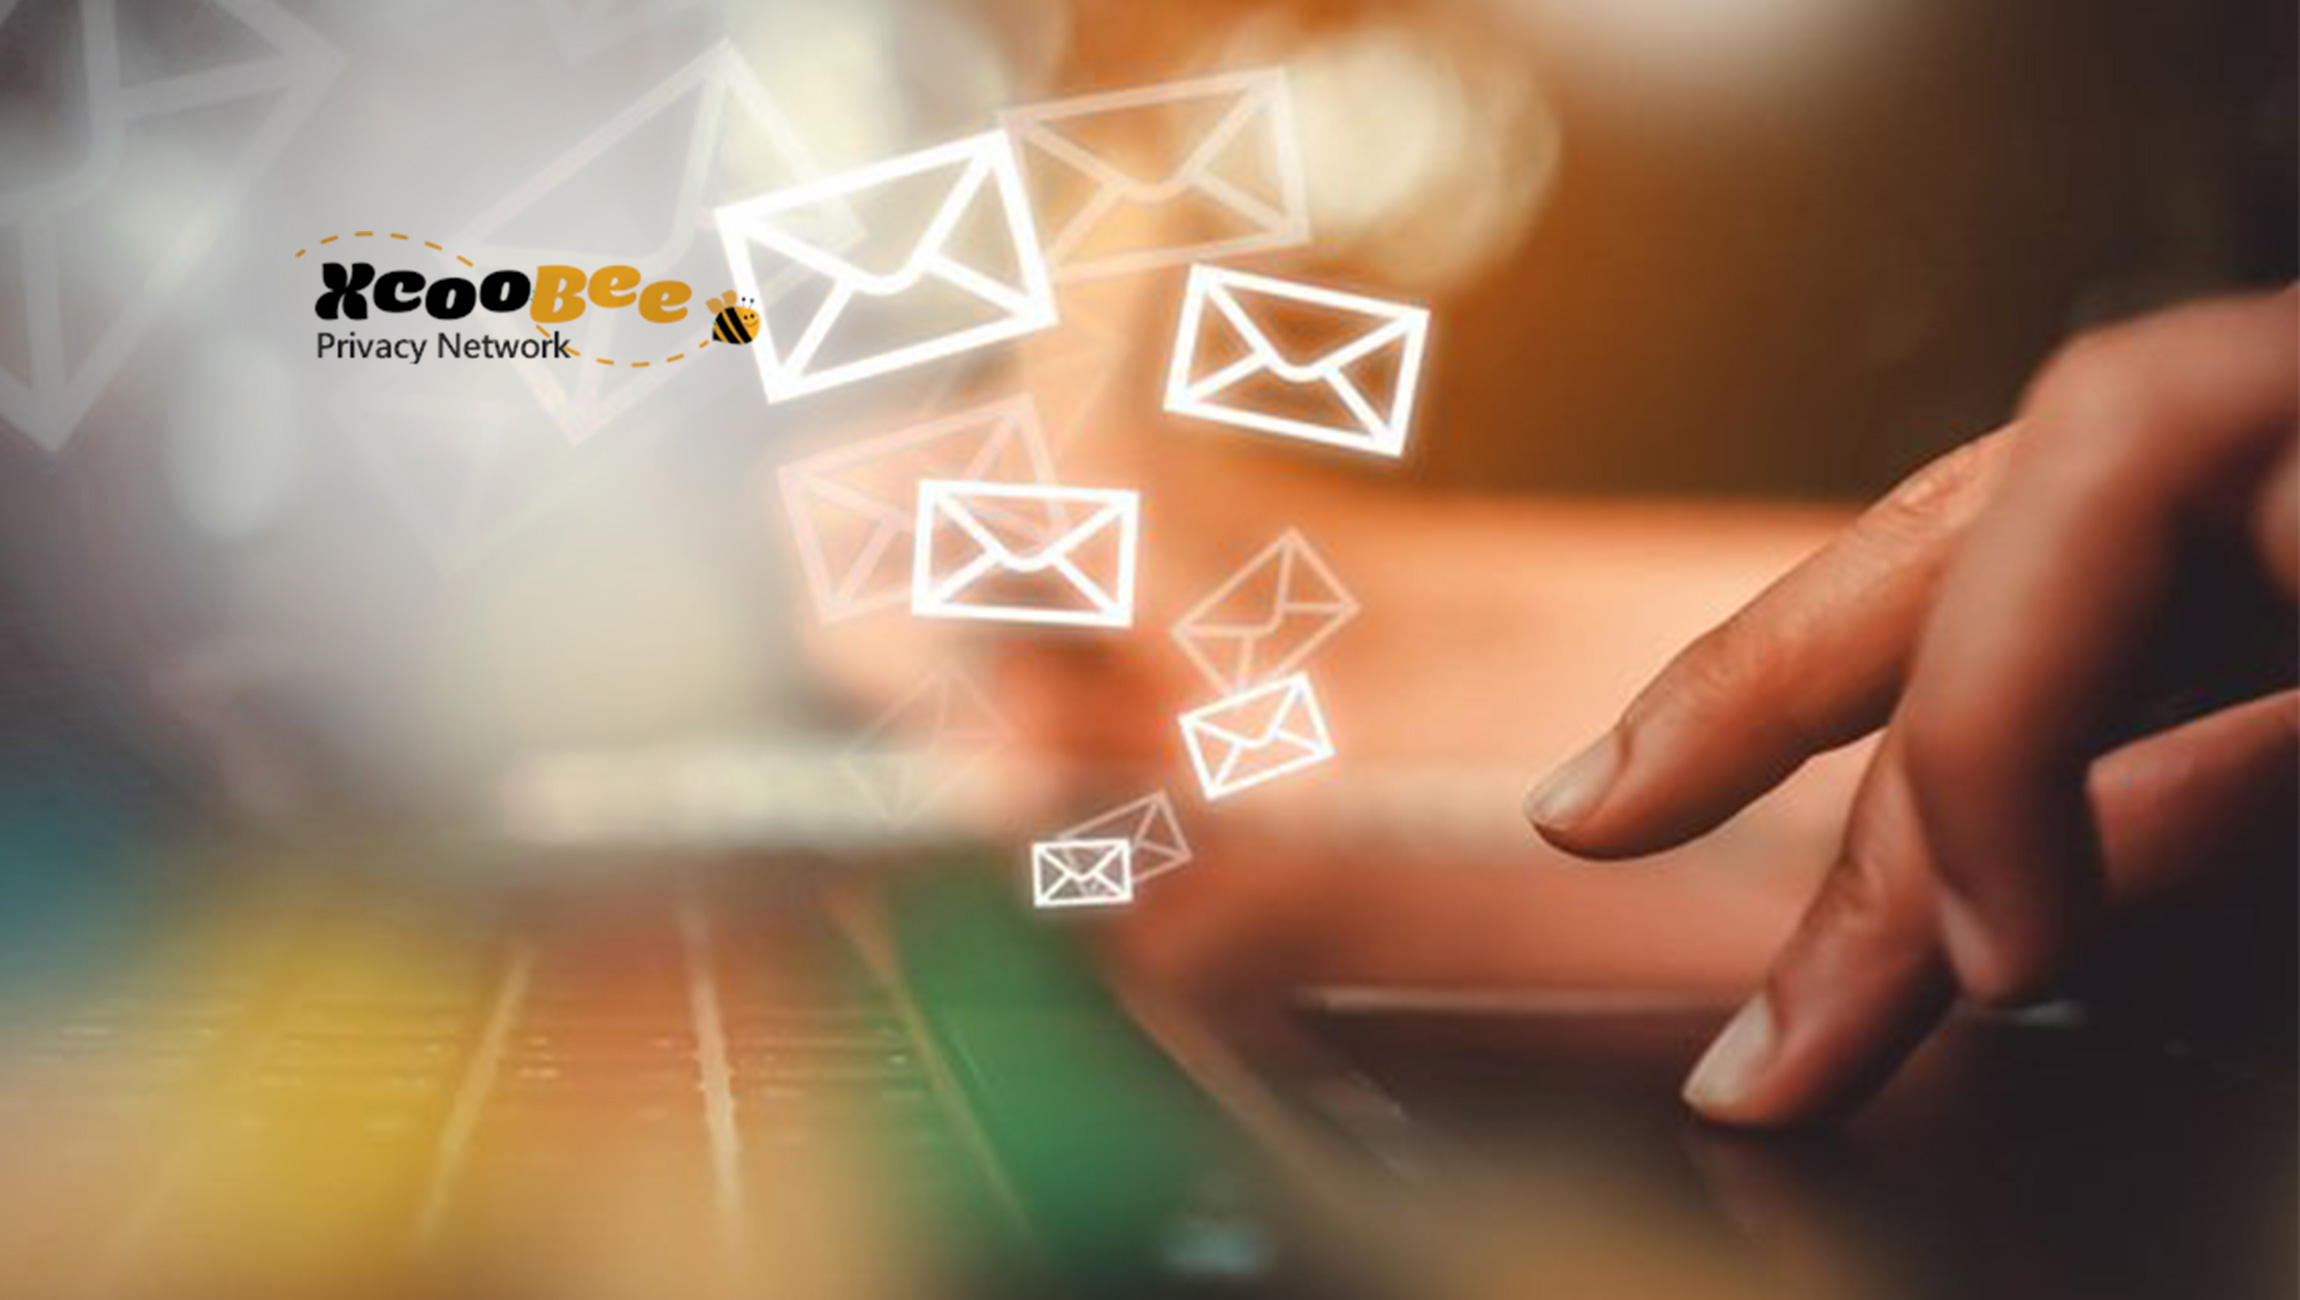 XcooBee's Email Guard Protects Your Personal Email Address